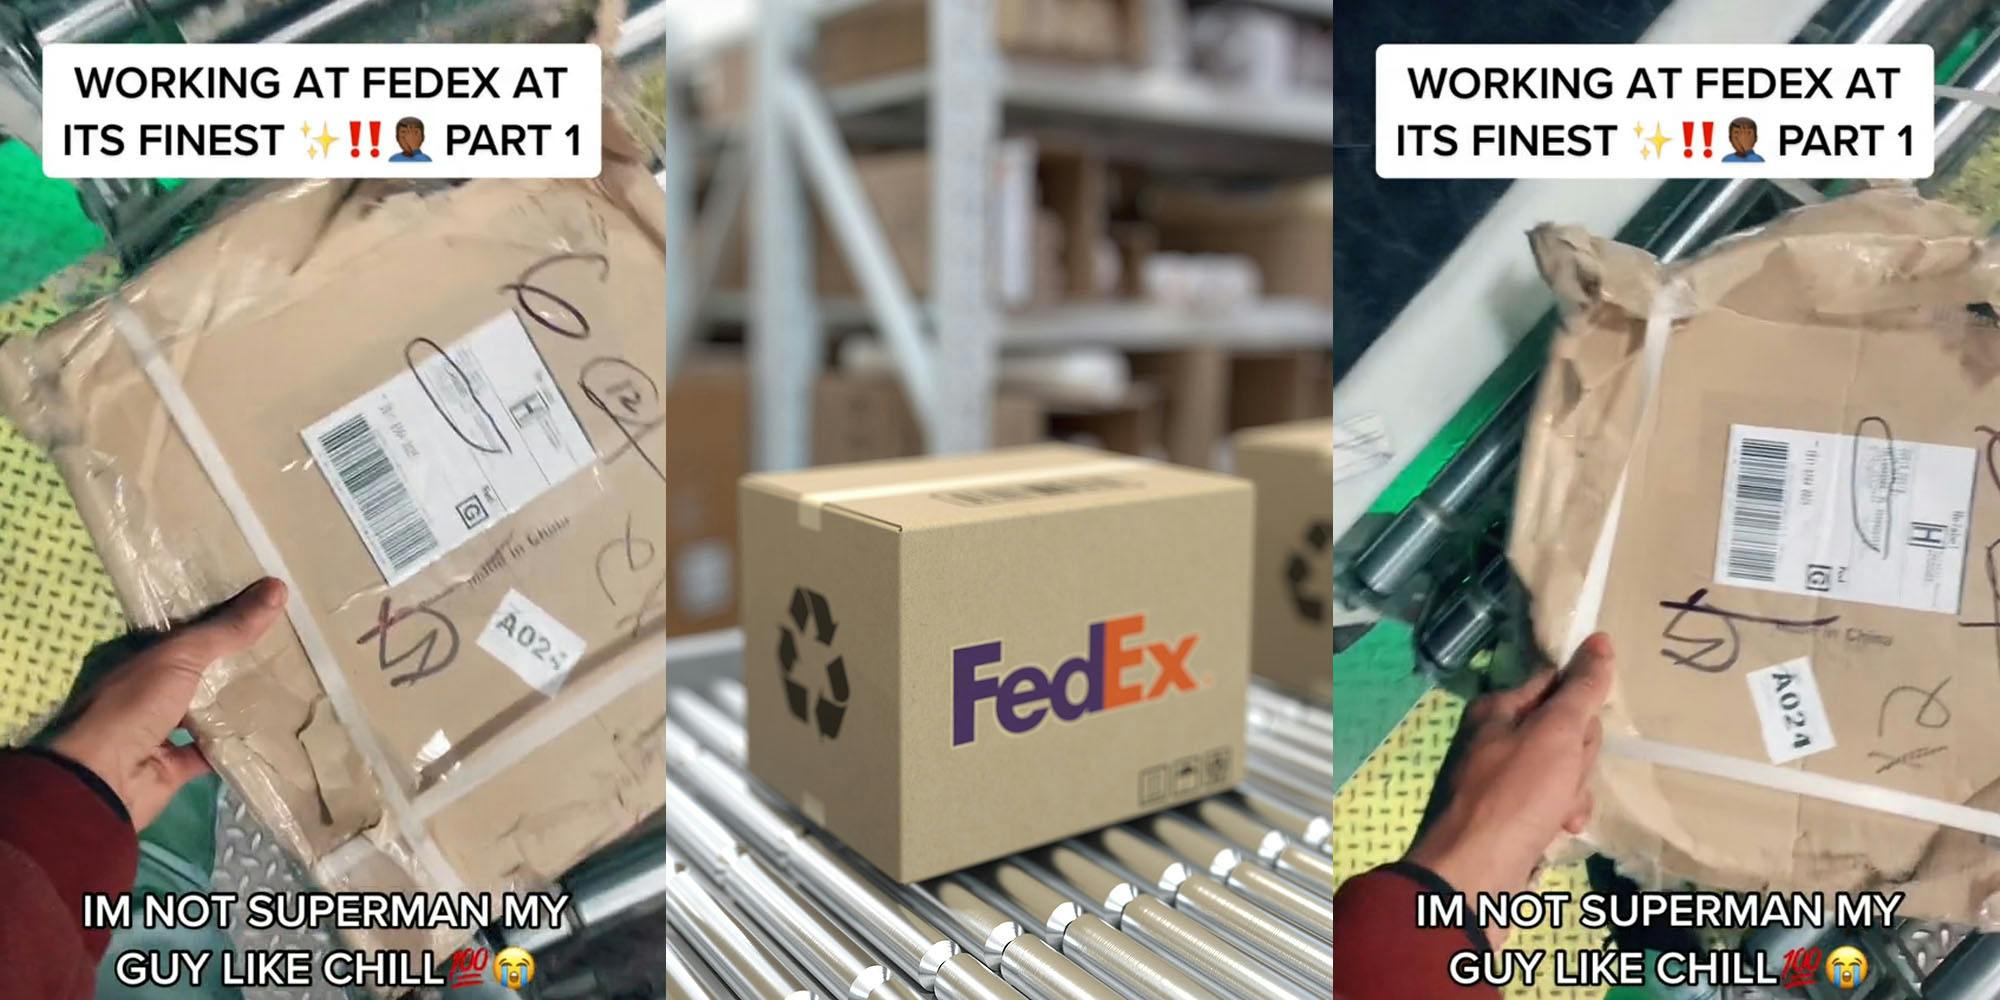 FedEx worker holding heavy package caption "WORKING AT FEDEX AT ITS FINEST PART 1 IM NOT SUPERMAN MY GUY LIKE CHILL" (l) FedEx package on conveyer belt (c) FedEx worker holding heavy package caption "WORKING AT FEDEX AT ITS FINEST PART 1 IM NOT SUPERMAN MY GUY LIKE CHILL" (r)